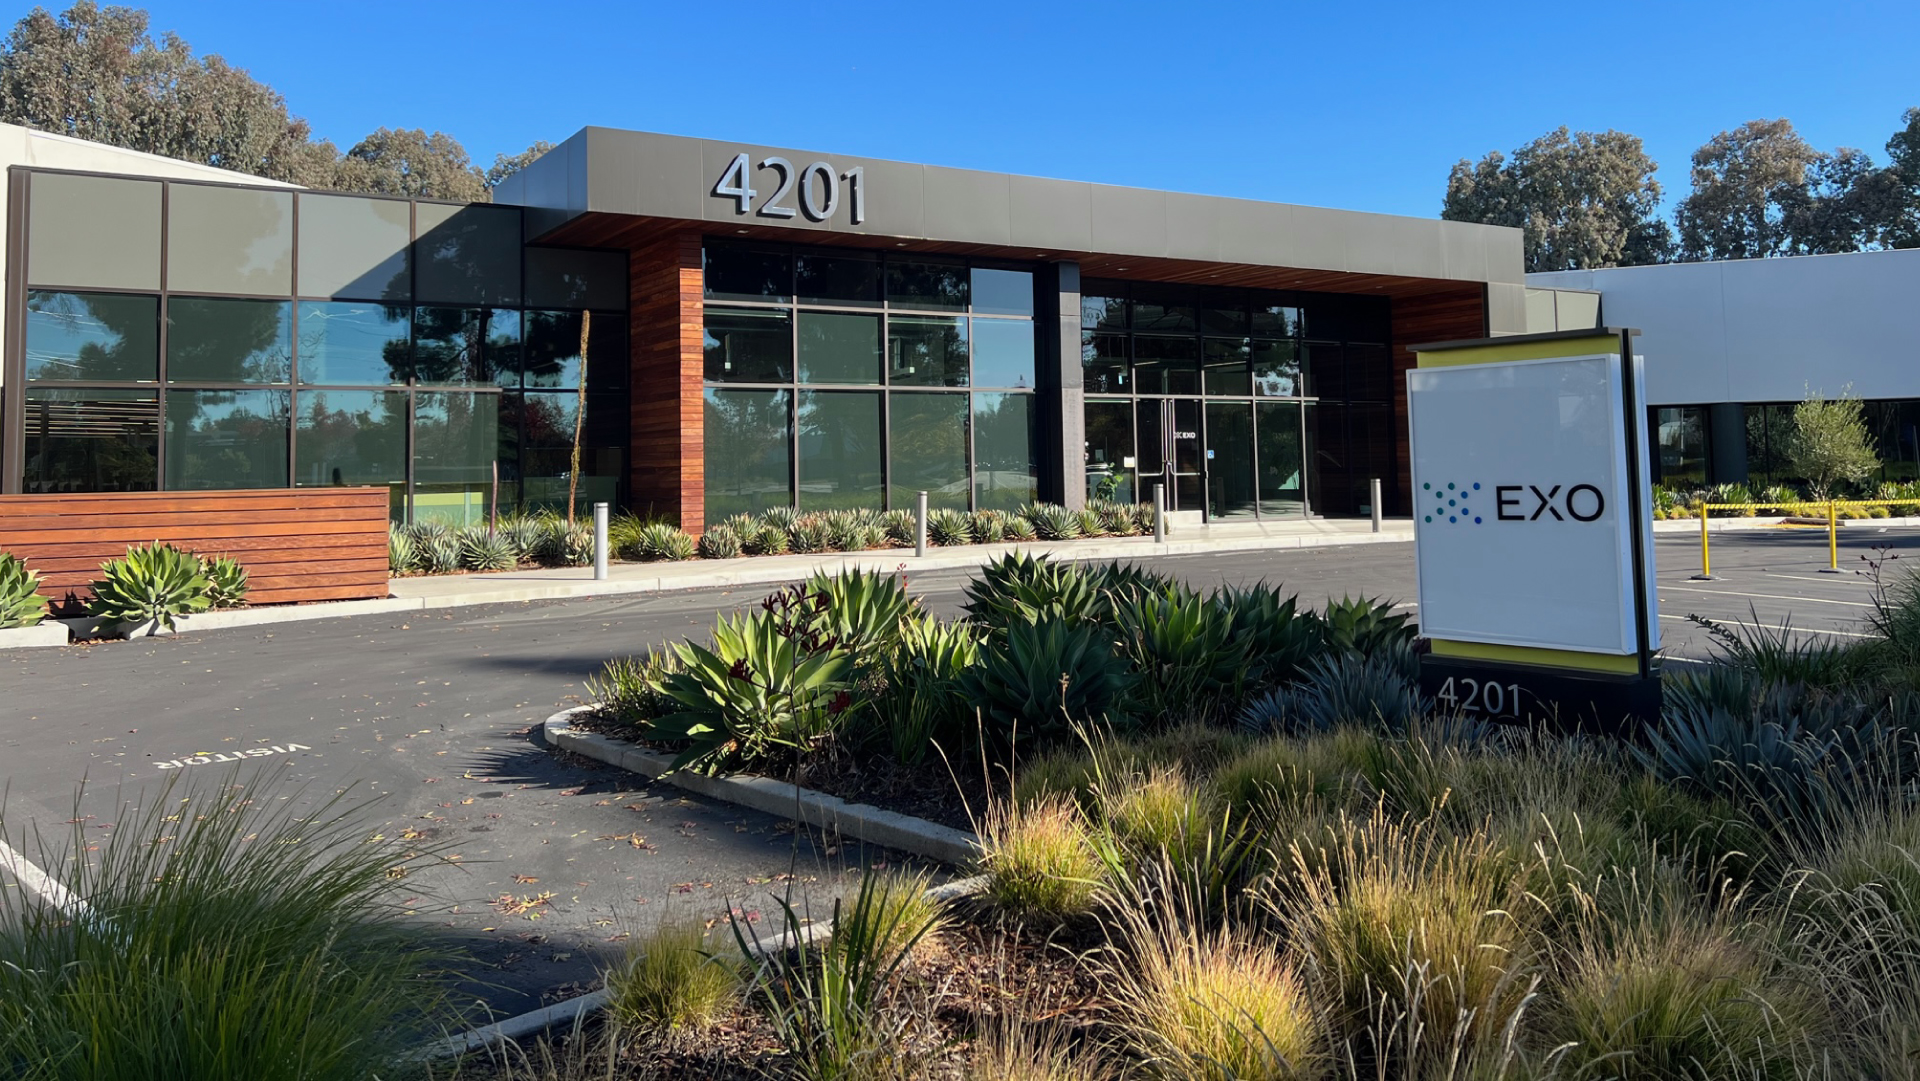 Exo doubles its footprint with new headquarters in Santa Clara, California